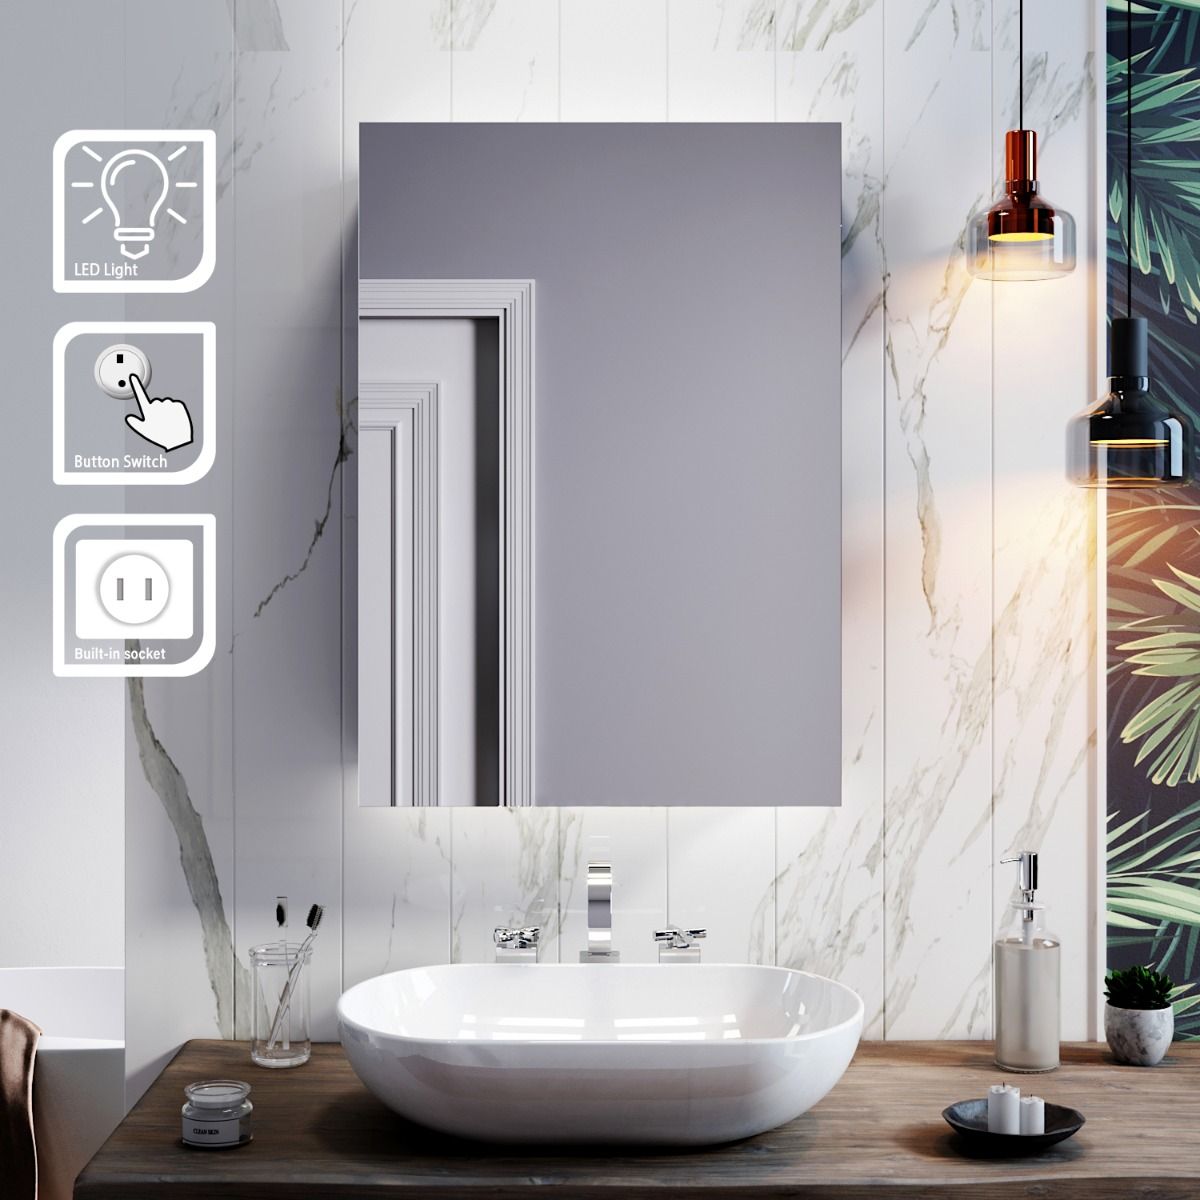 Bathroom LED Mirror Cabinet Storage Back-lit 500x700mm Button Switch with  Socket